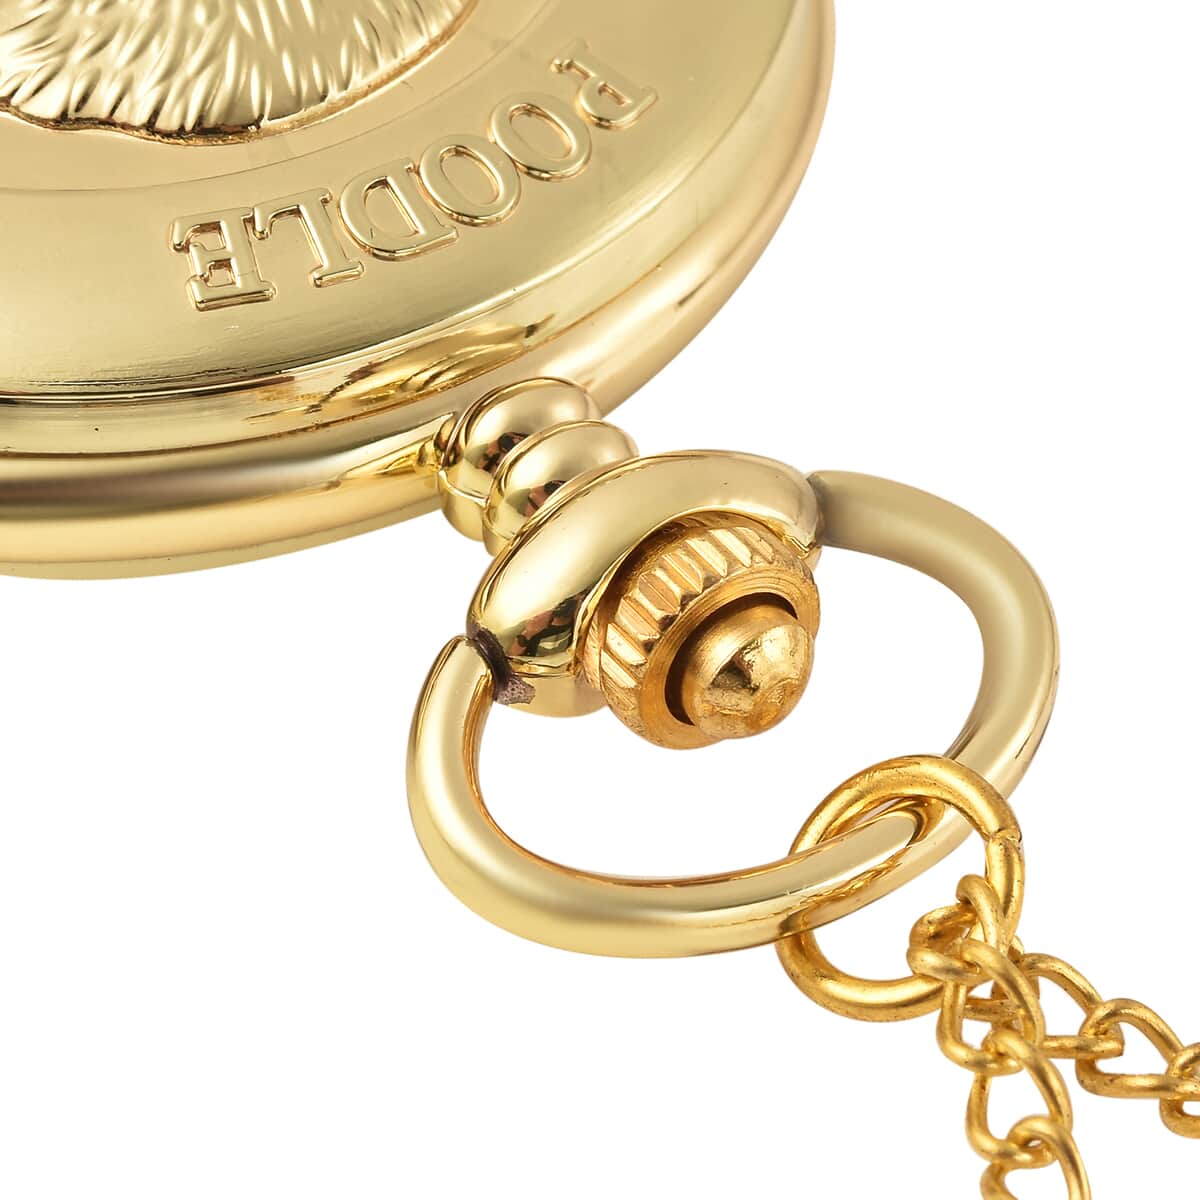 Strada Japanese Movement Poodle Pocket Watch in Goldtone with Chain (31 Inches) image number 5